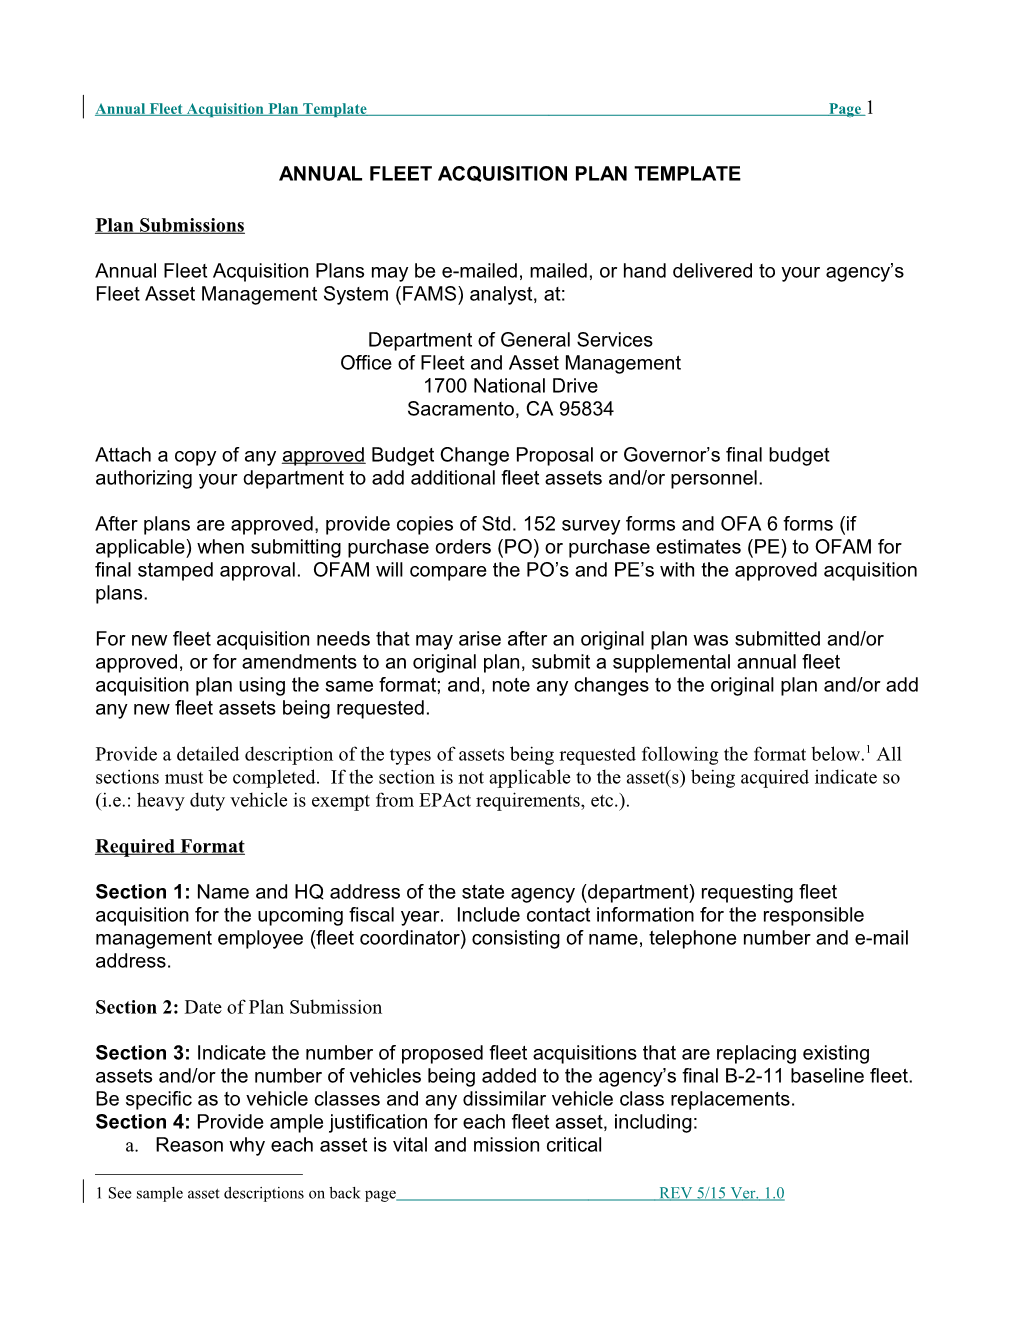 Annual Fleet Acquisition Plan Templatepage 1